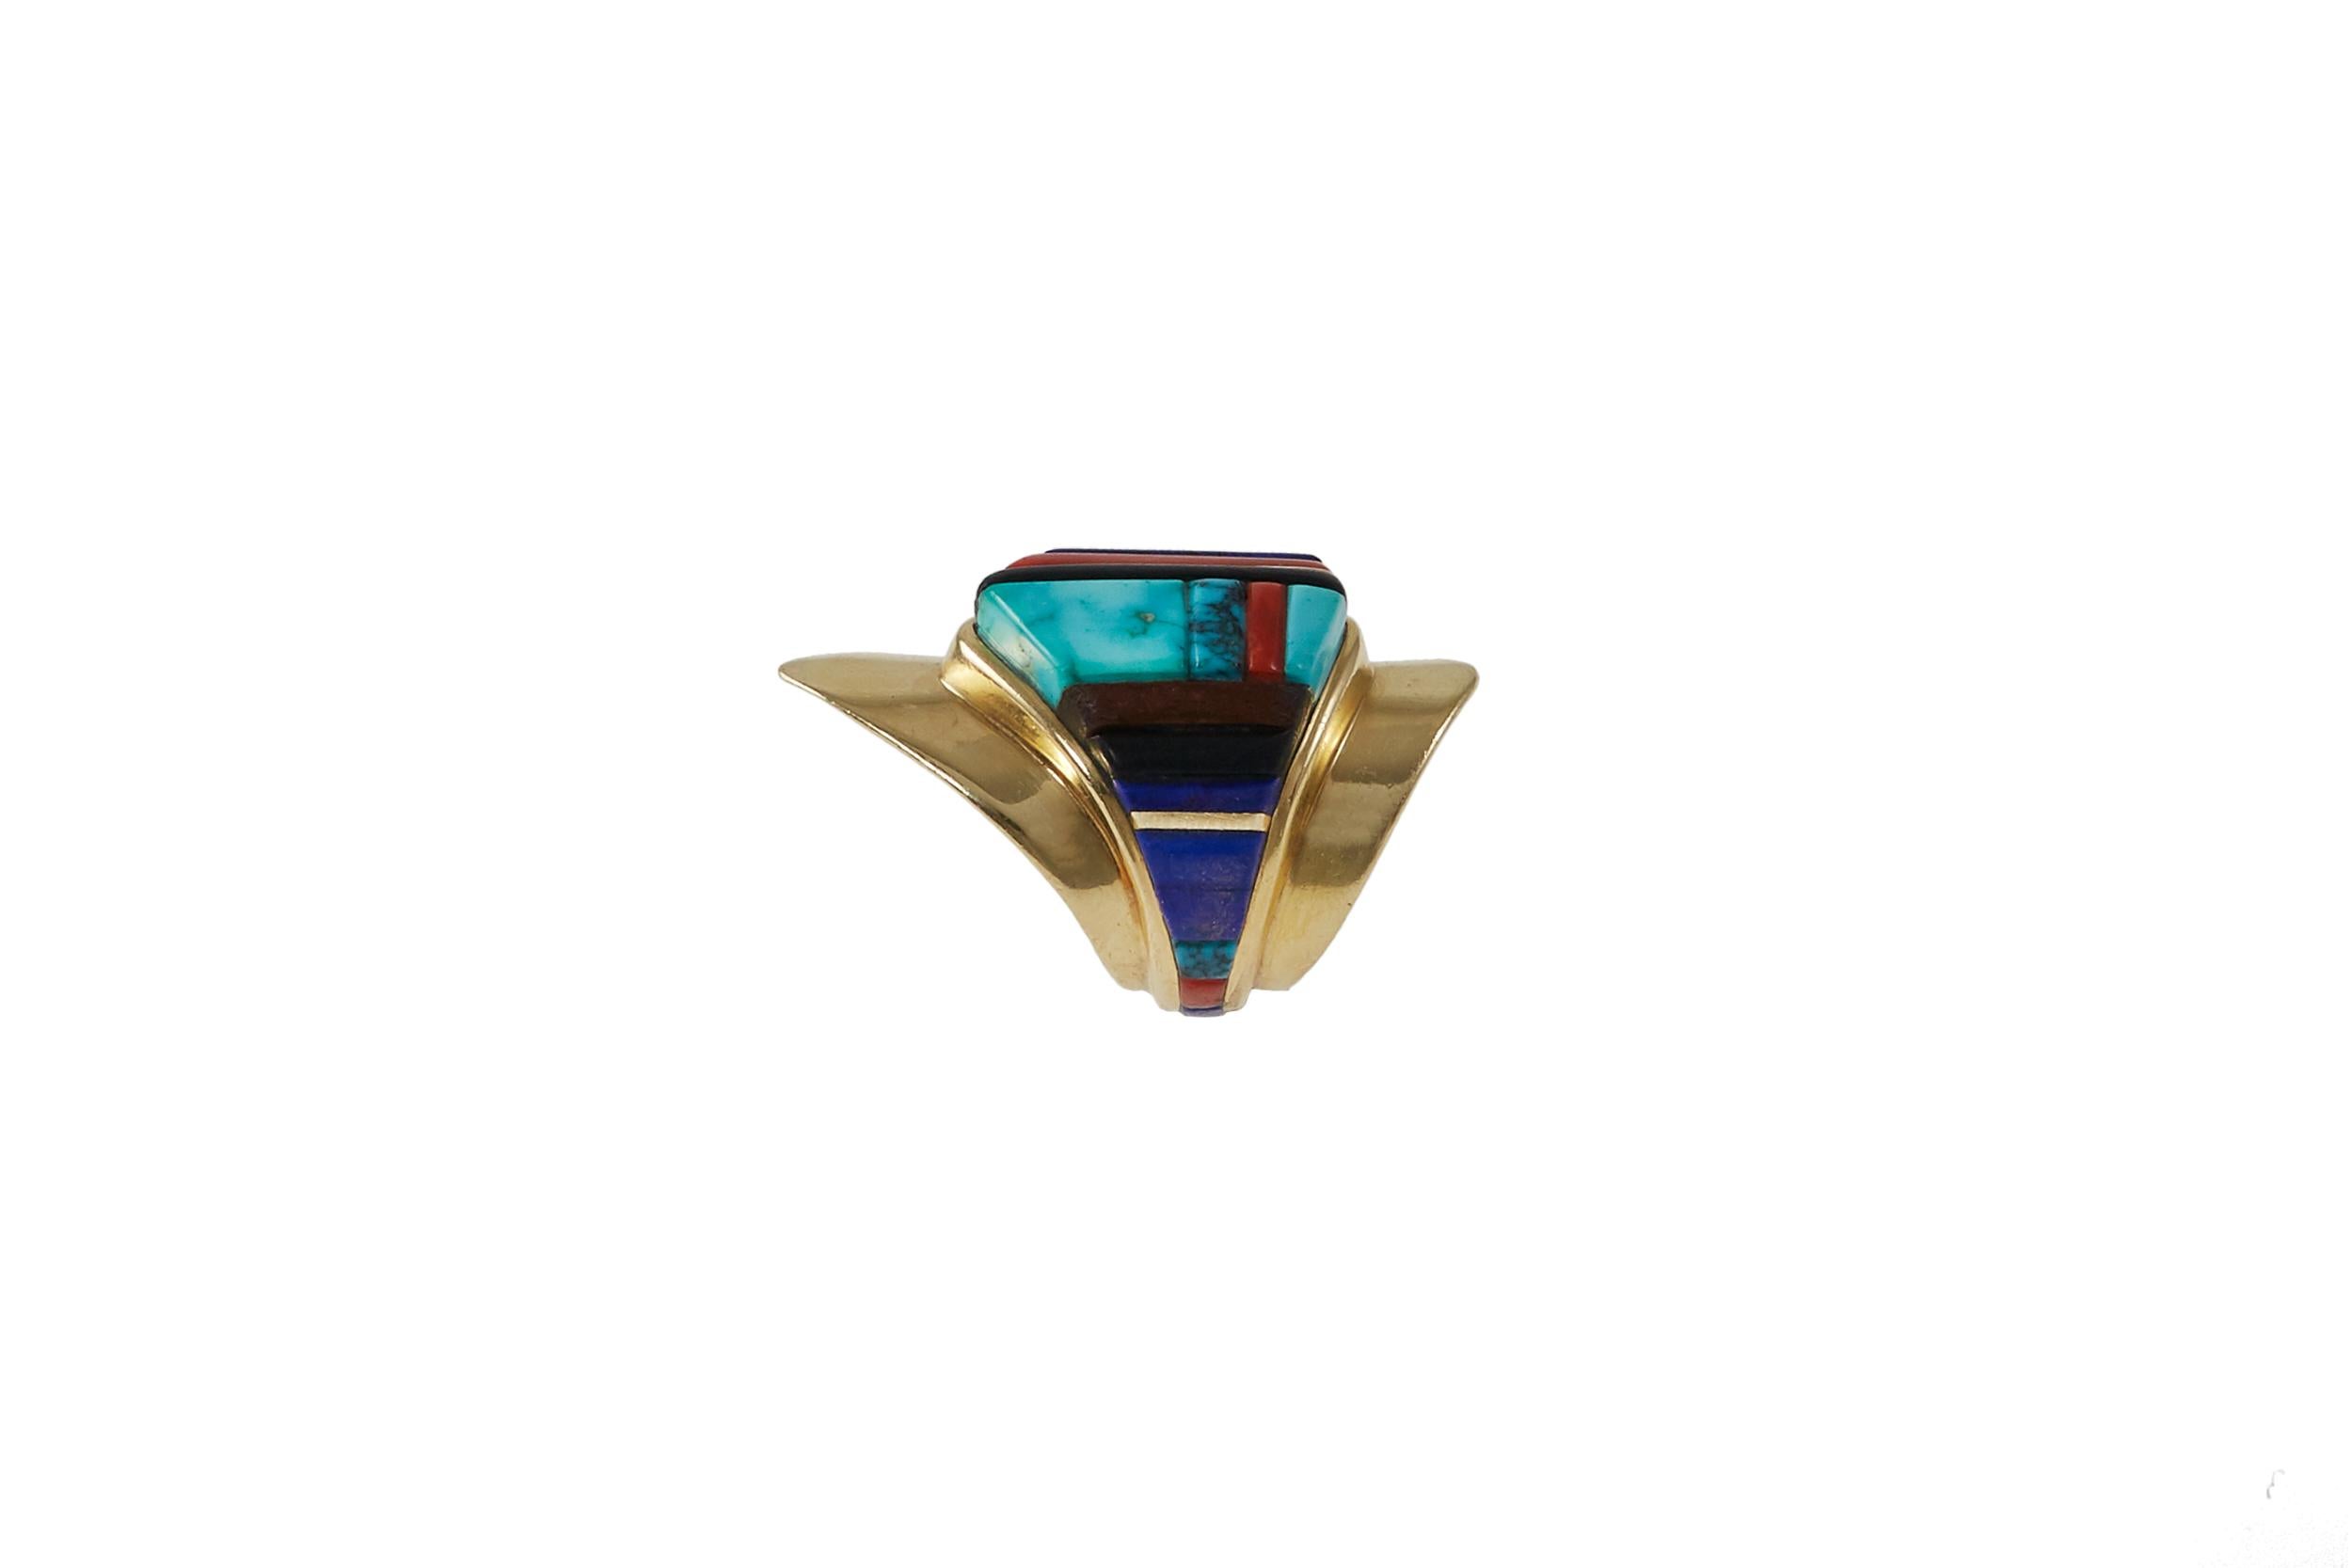 A lapis lazuli, coral, turquoise, wood and 14 karat gold shield ring, by Charles Loloma, c. 1970. Vintage jewelry. Signed Loloma, stamped 14k. Ring size 5. Similar examples are shown in the excellent book 